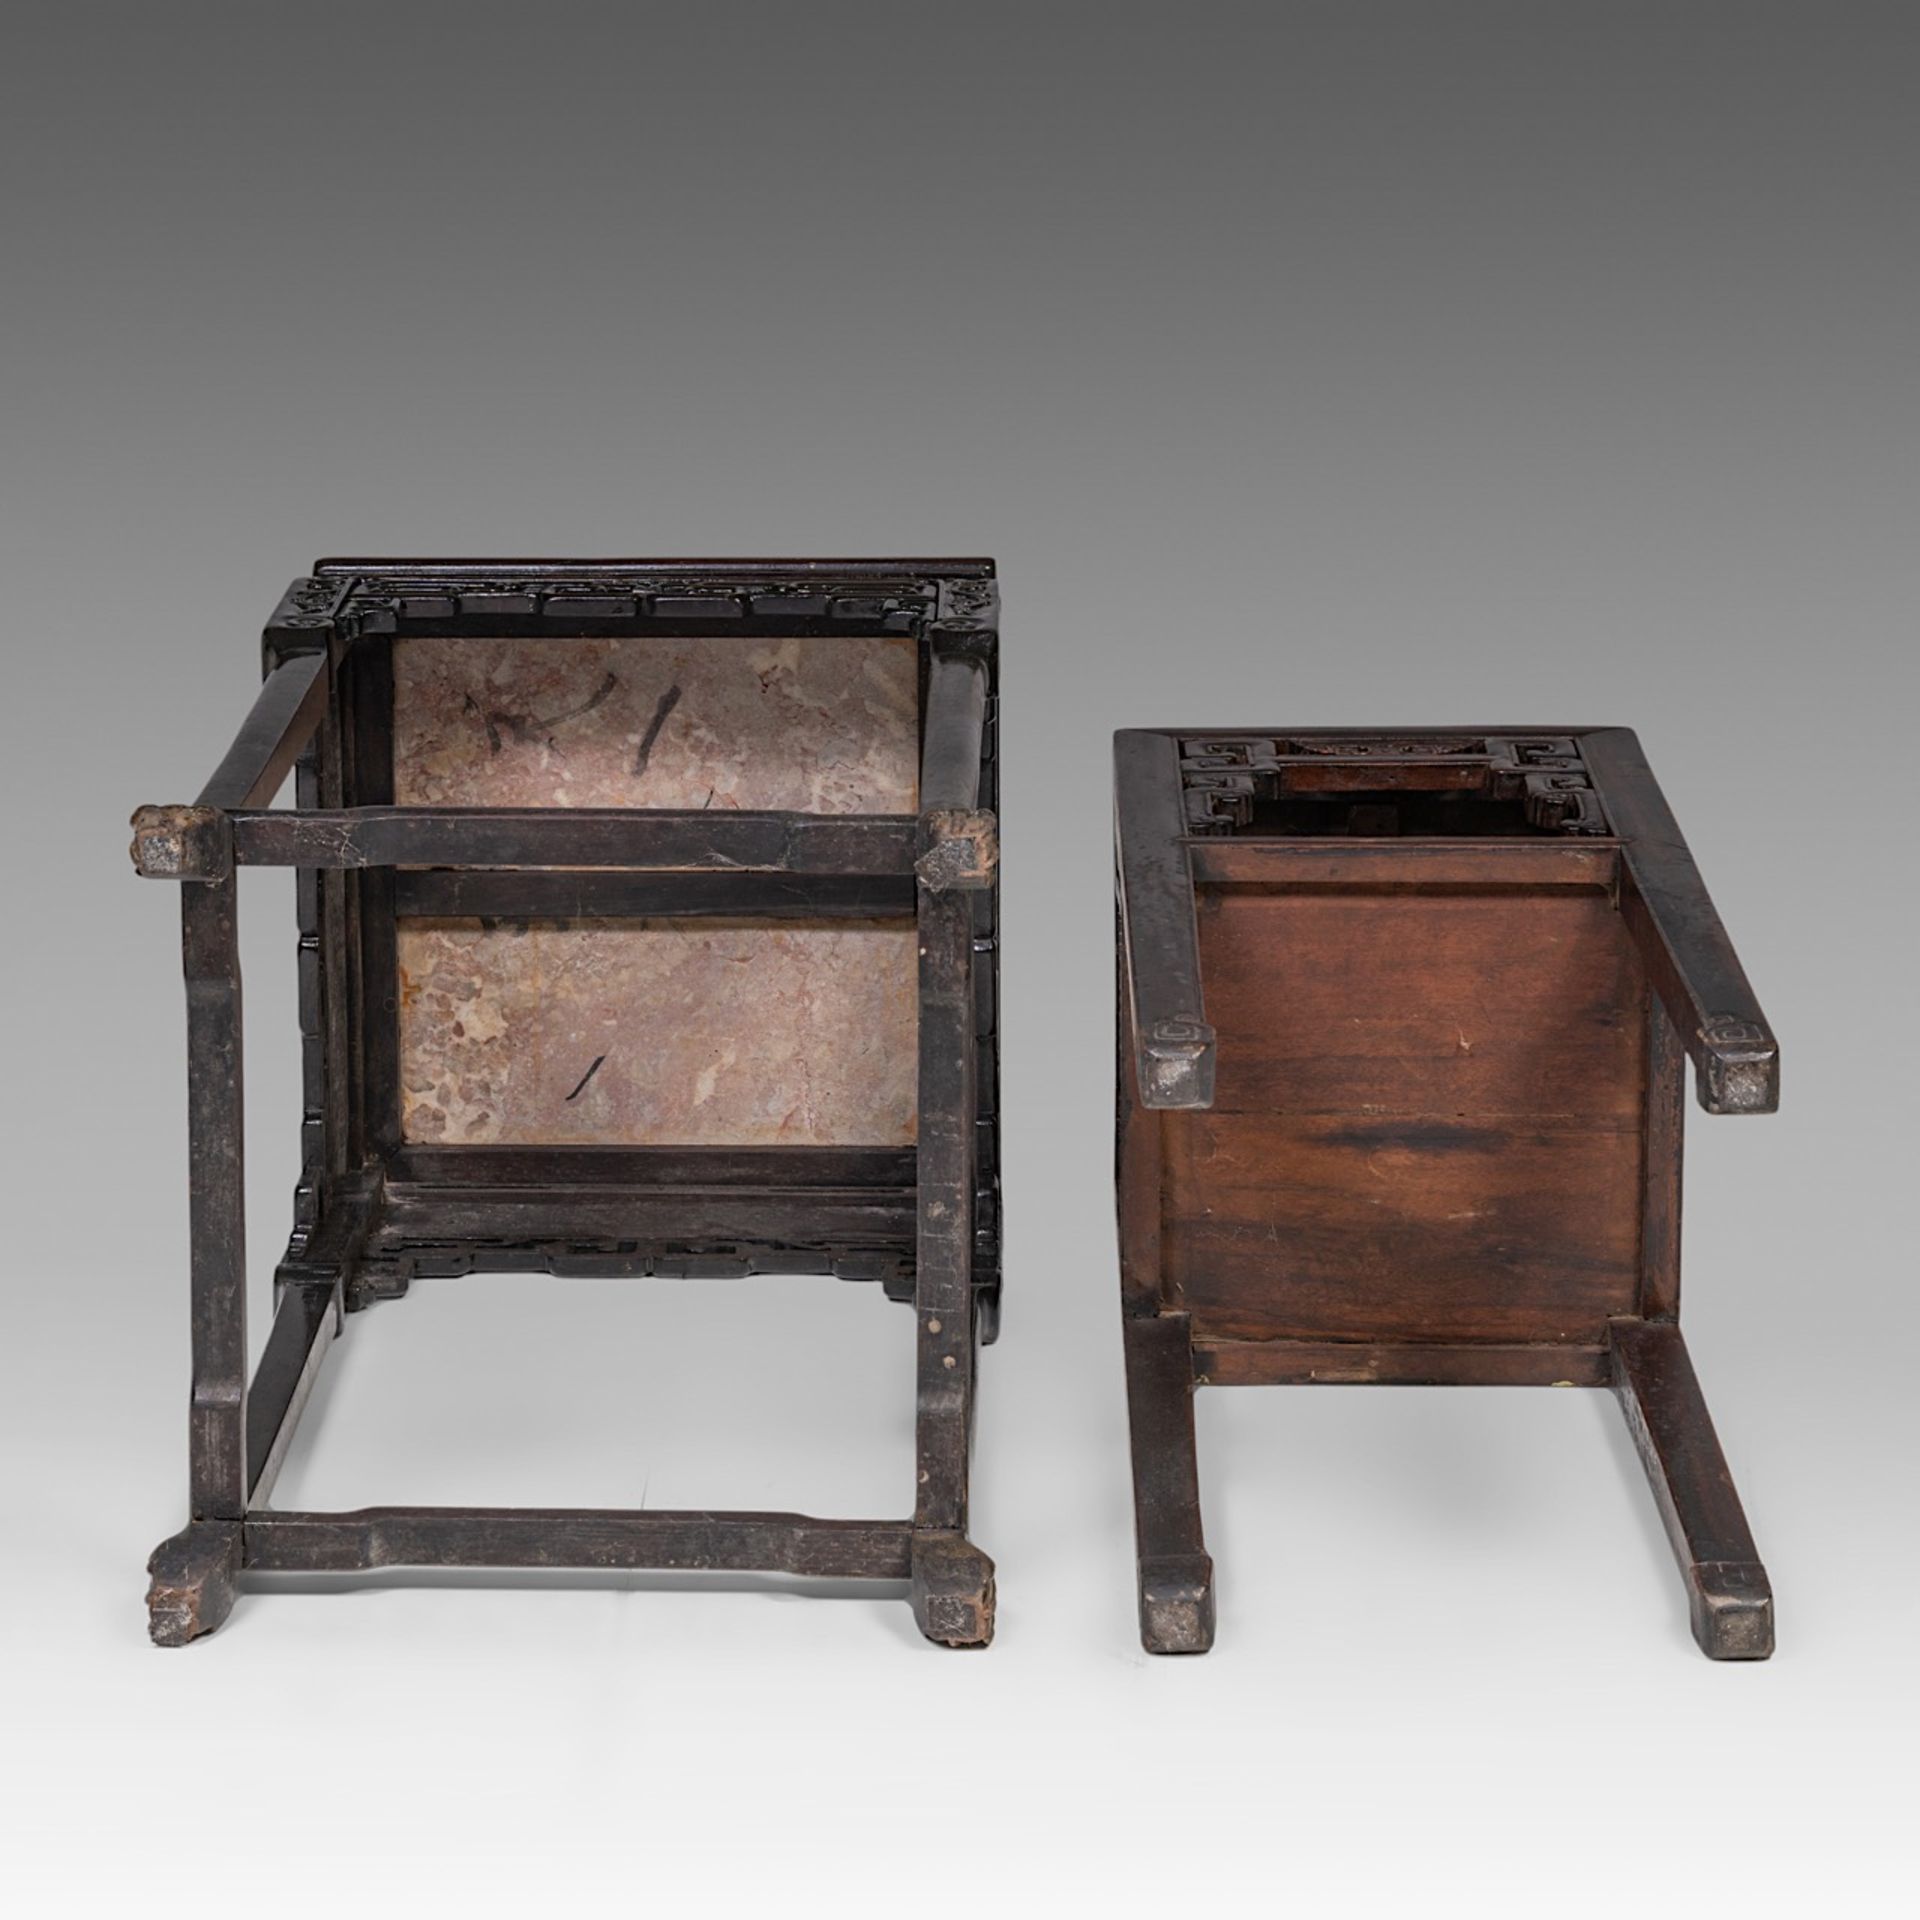 Two South-Chinese carved hardwood bases, one with a marble top, late Qing, largest H 82 - 48 x 48 cm - Bild 7 aus 7